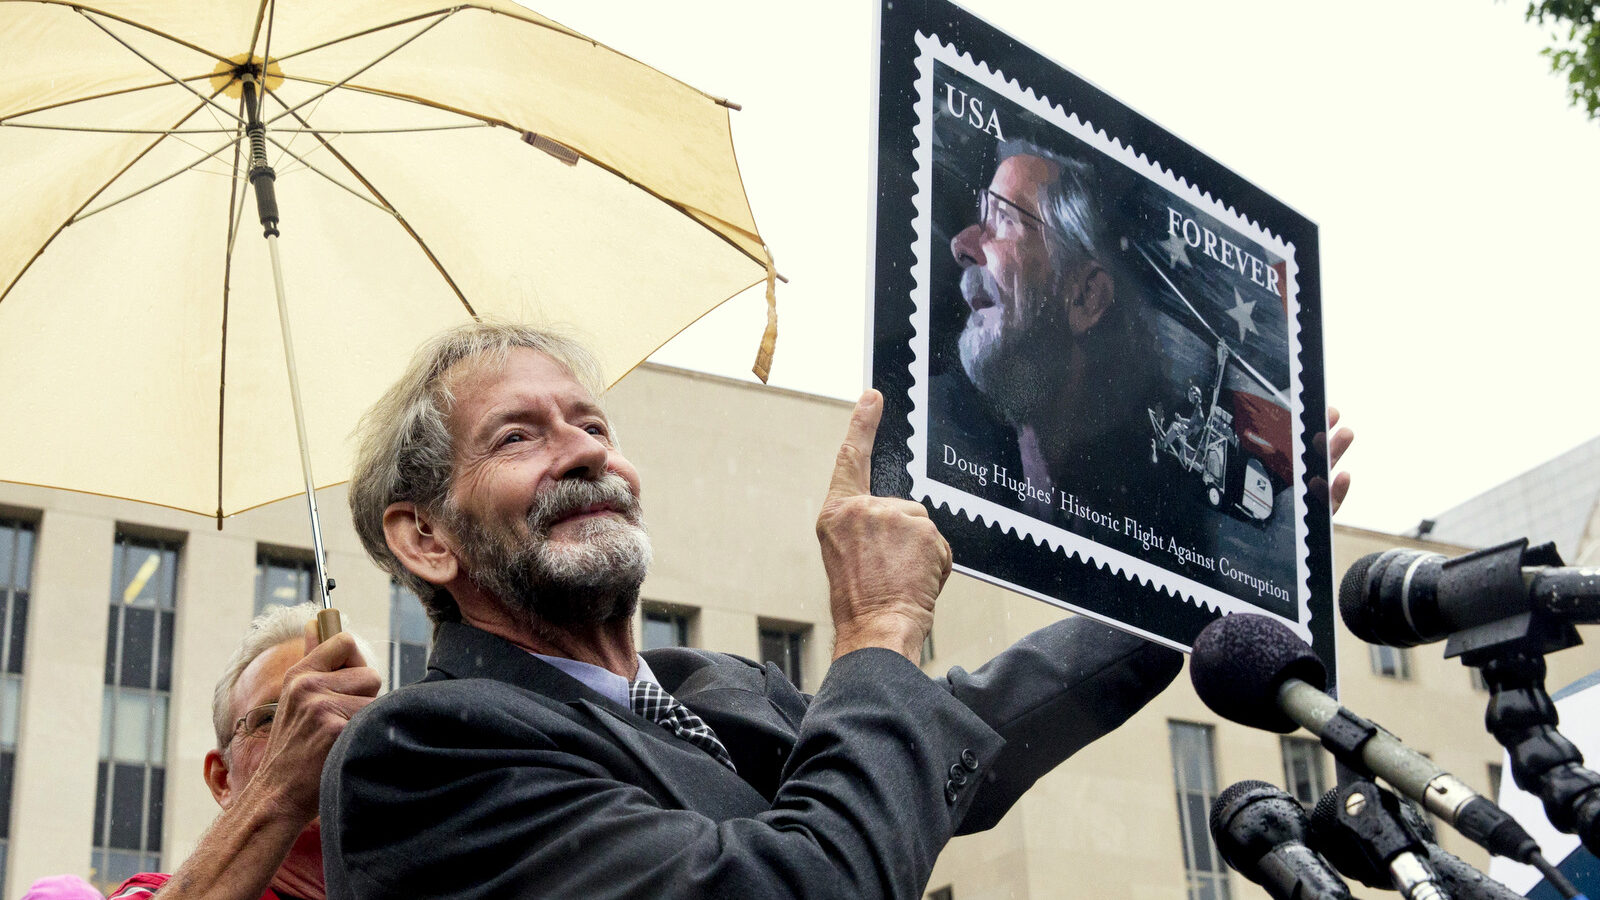 Douglas Hughes of Florida holds up a design for a stamp that was given to him by an artist as a gift, while meeting with reporters outside federal court in Washington, Thursday, May 21, 2015, . Hughes, who flew a gyrocopter through some of America's most restricted airspace before landing at the Capitol pleaded not guilty on Thursday to the six charges he faces. (AP Photo/Jacquelyn Martin)